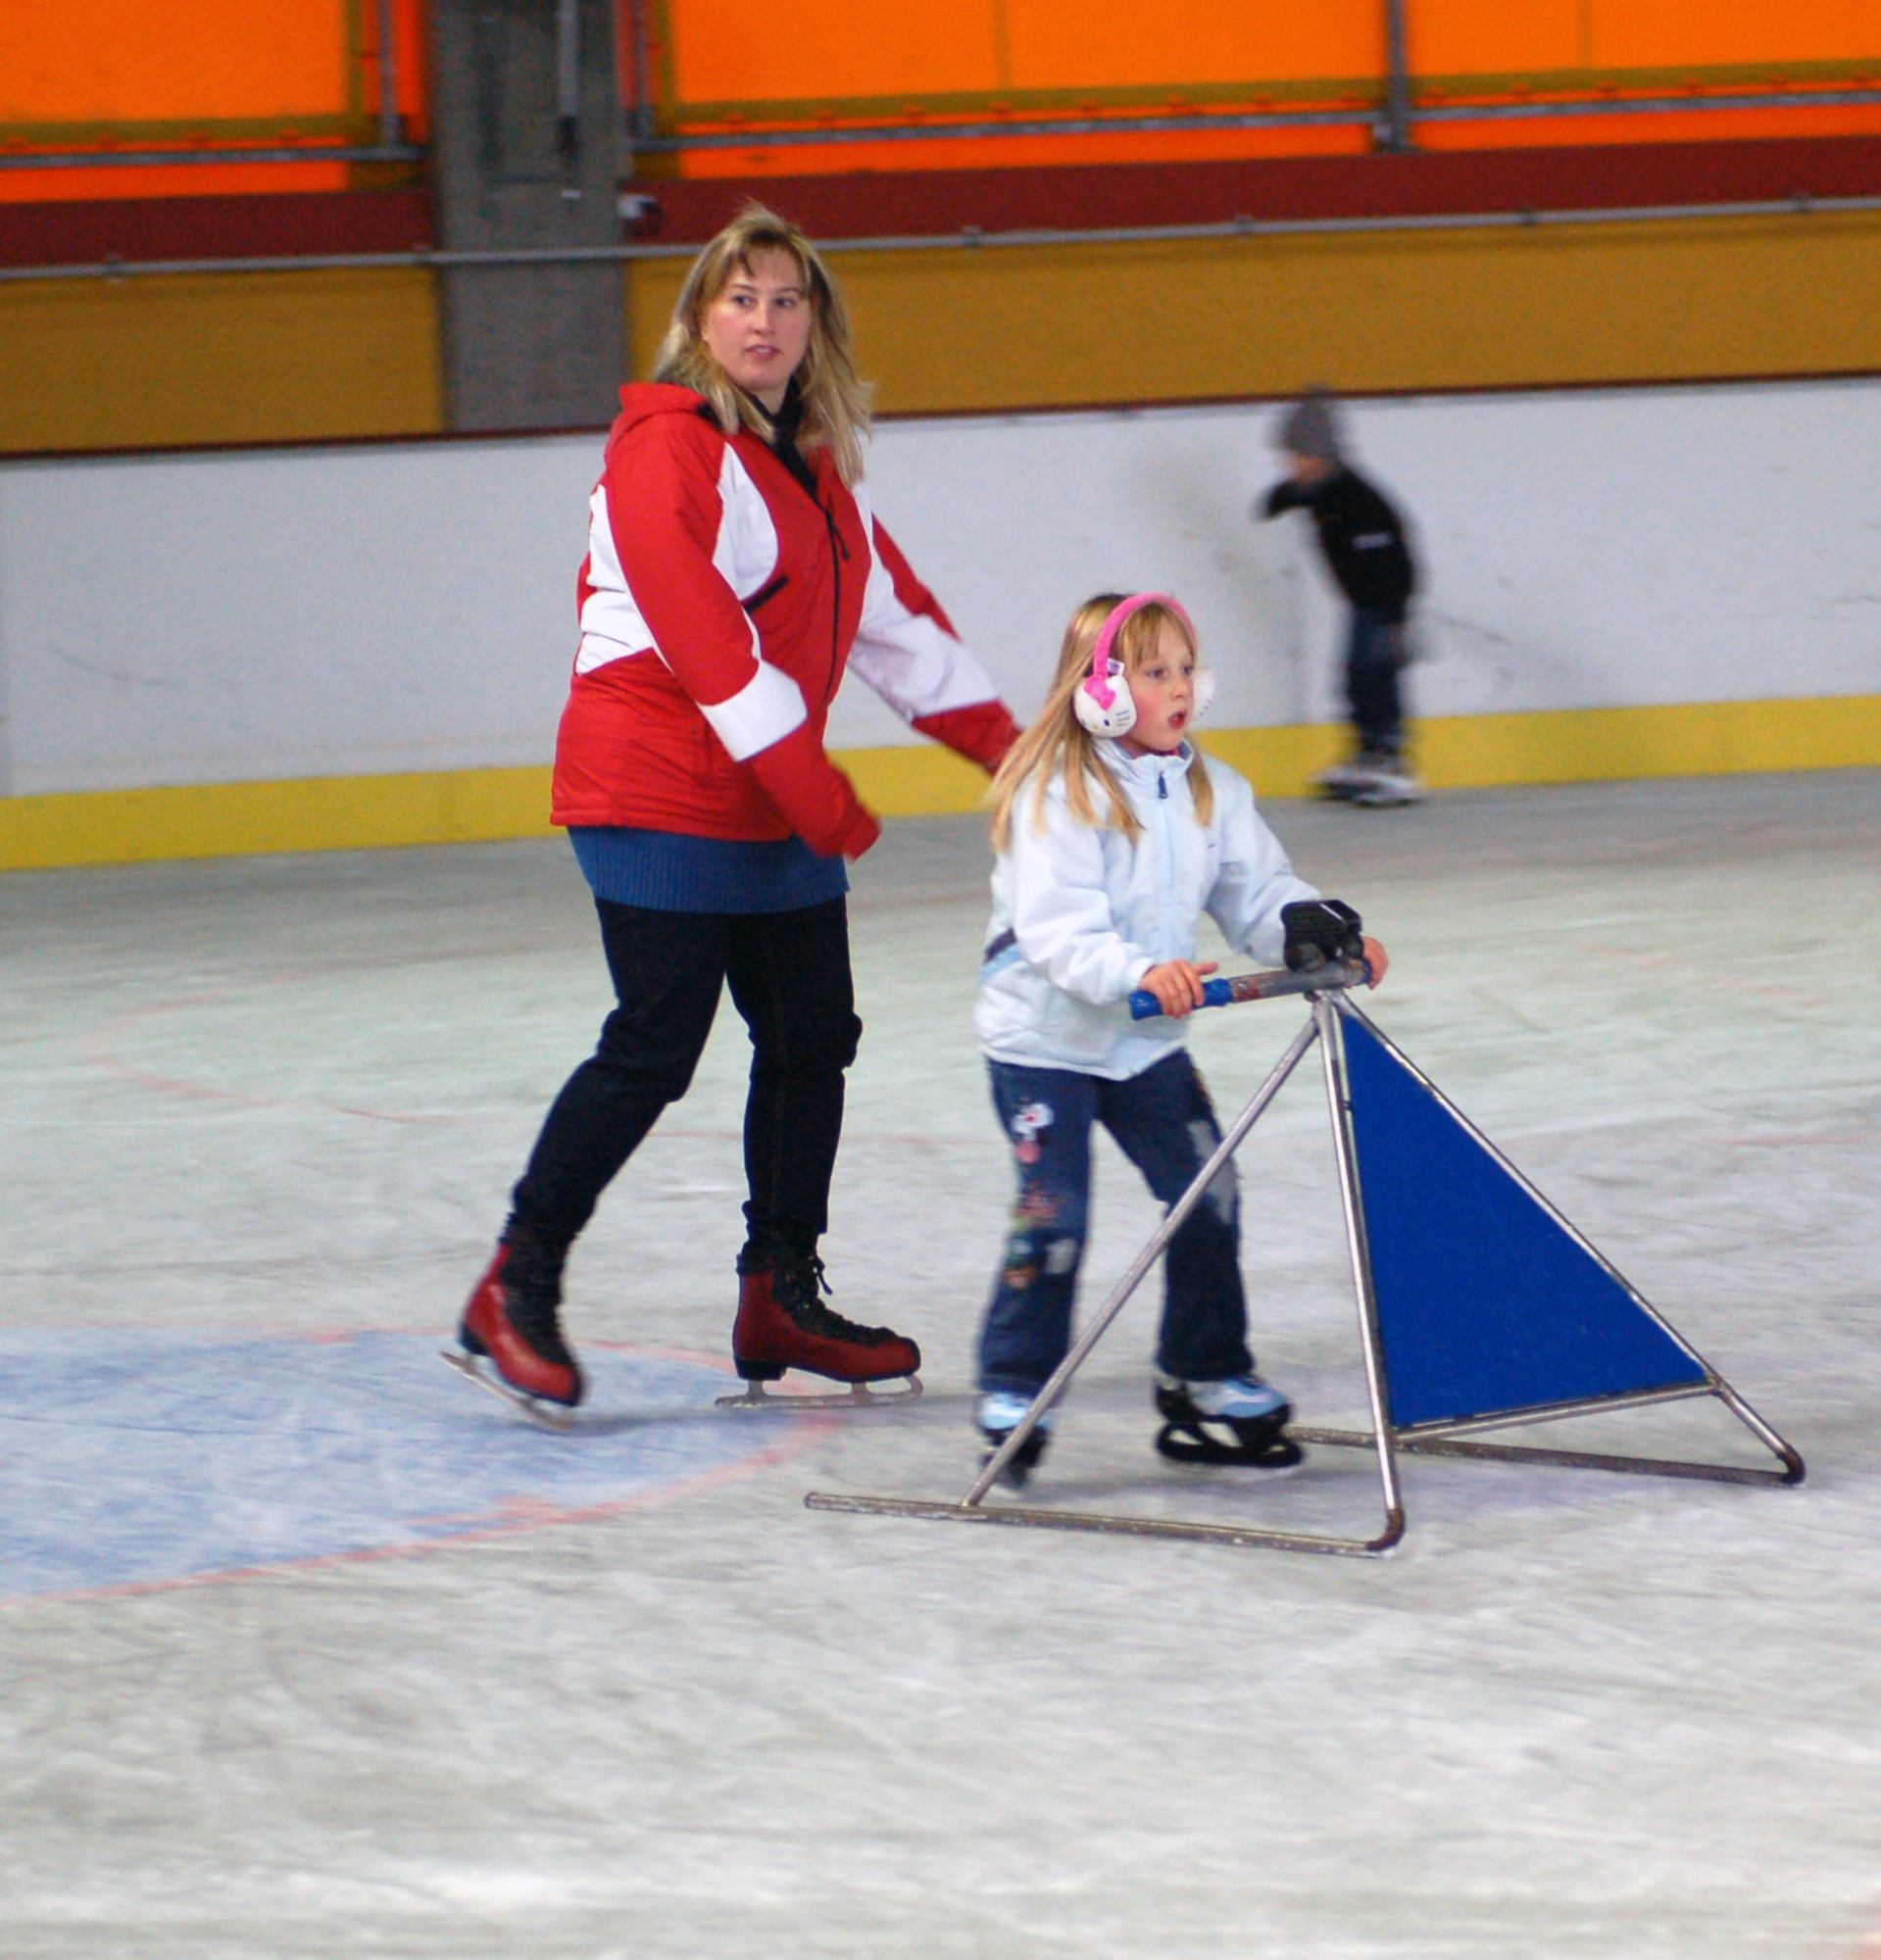 BITBURG, Germany -- A child at the Bitburg ice rink uses special learning equipment designed to help children keep their balance as they learn how to ice skate. Ice stadium officials will provide respective information and help with training children or adults on the ice. Two ice rinks can be found in the Eifel area, one of which is in Trier, and one (shown in the photo) is located right outside the former base in Bitburg.  The Bitburg ice rink is now open for the 2010 season and will remain open until April 2011. (U.S. Air Force photo/Iris Reiff)